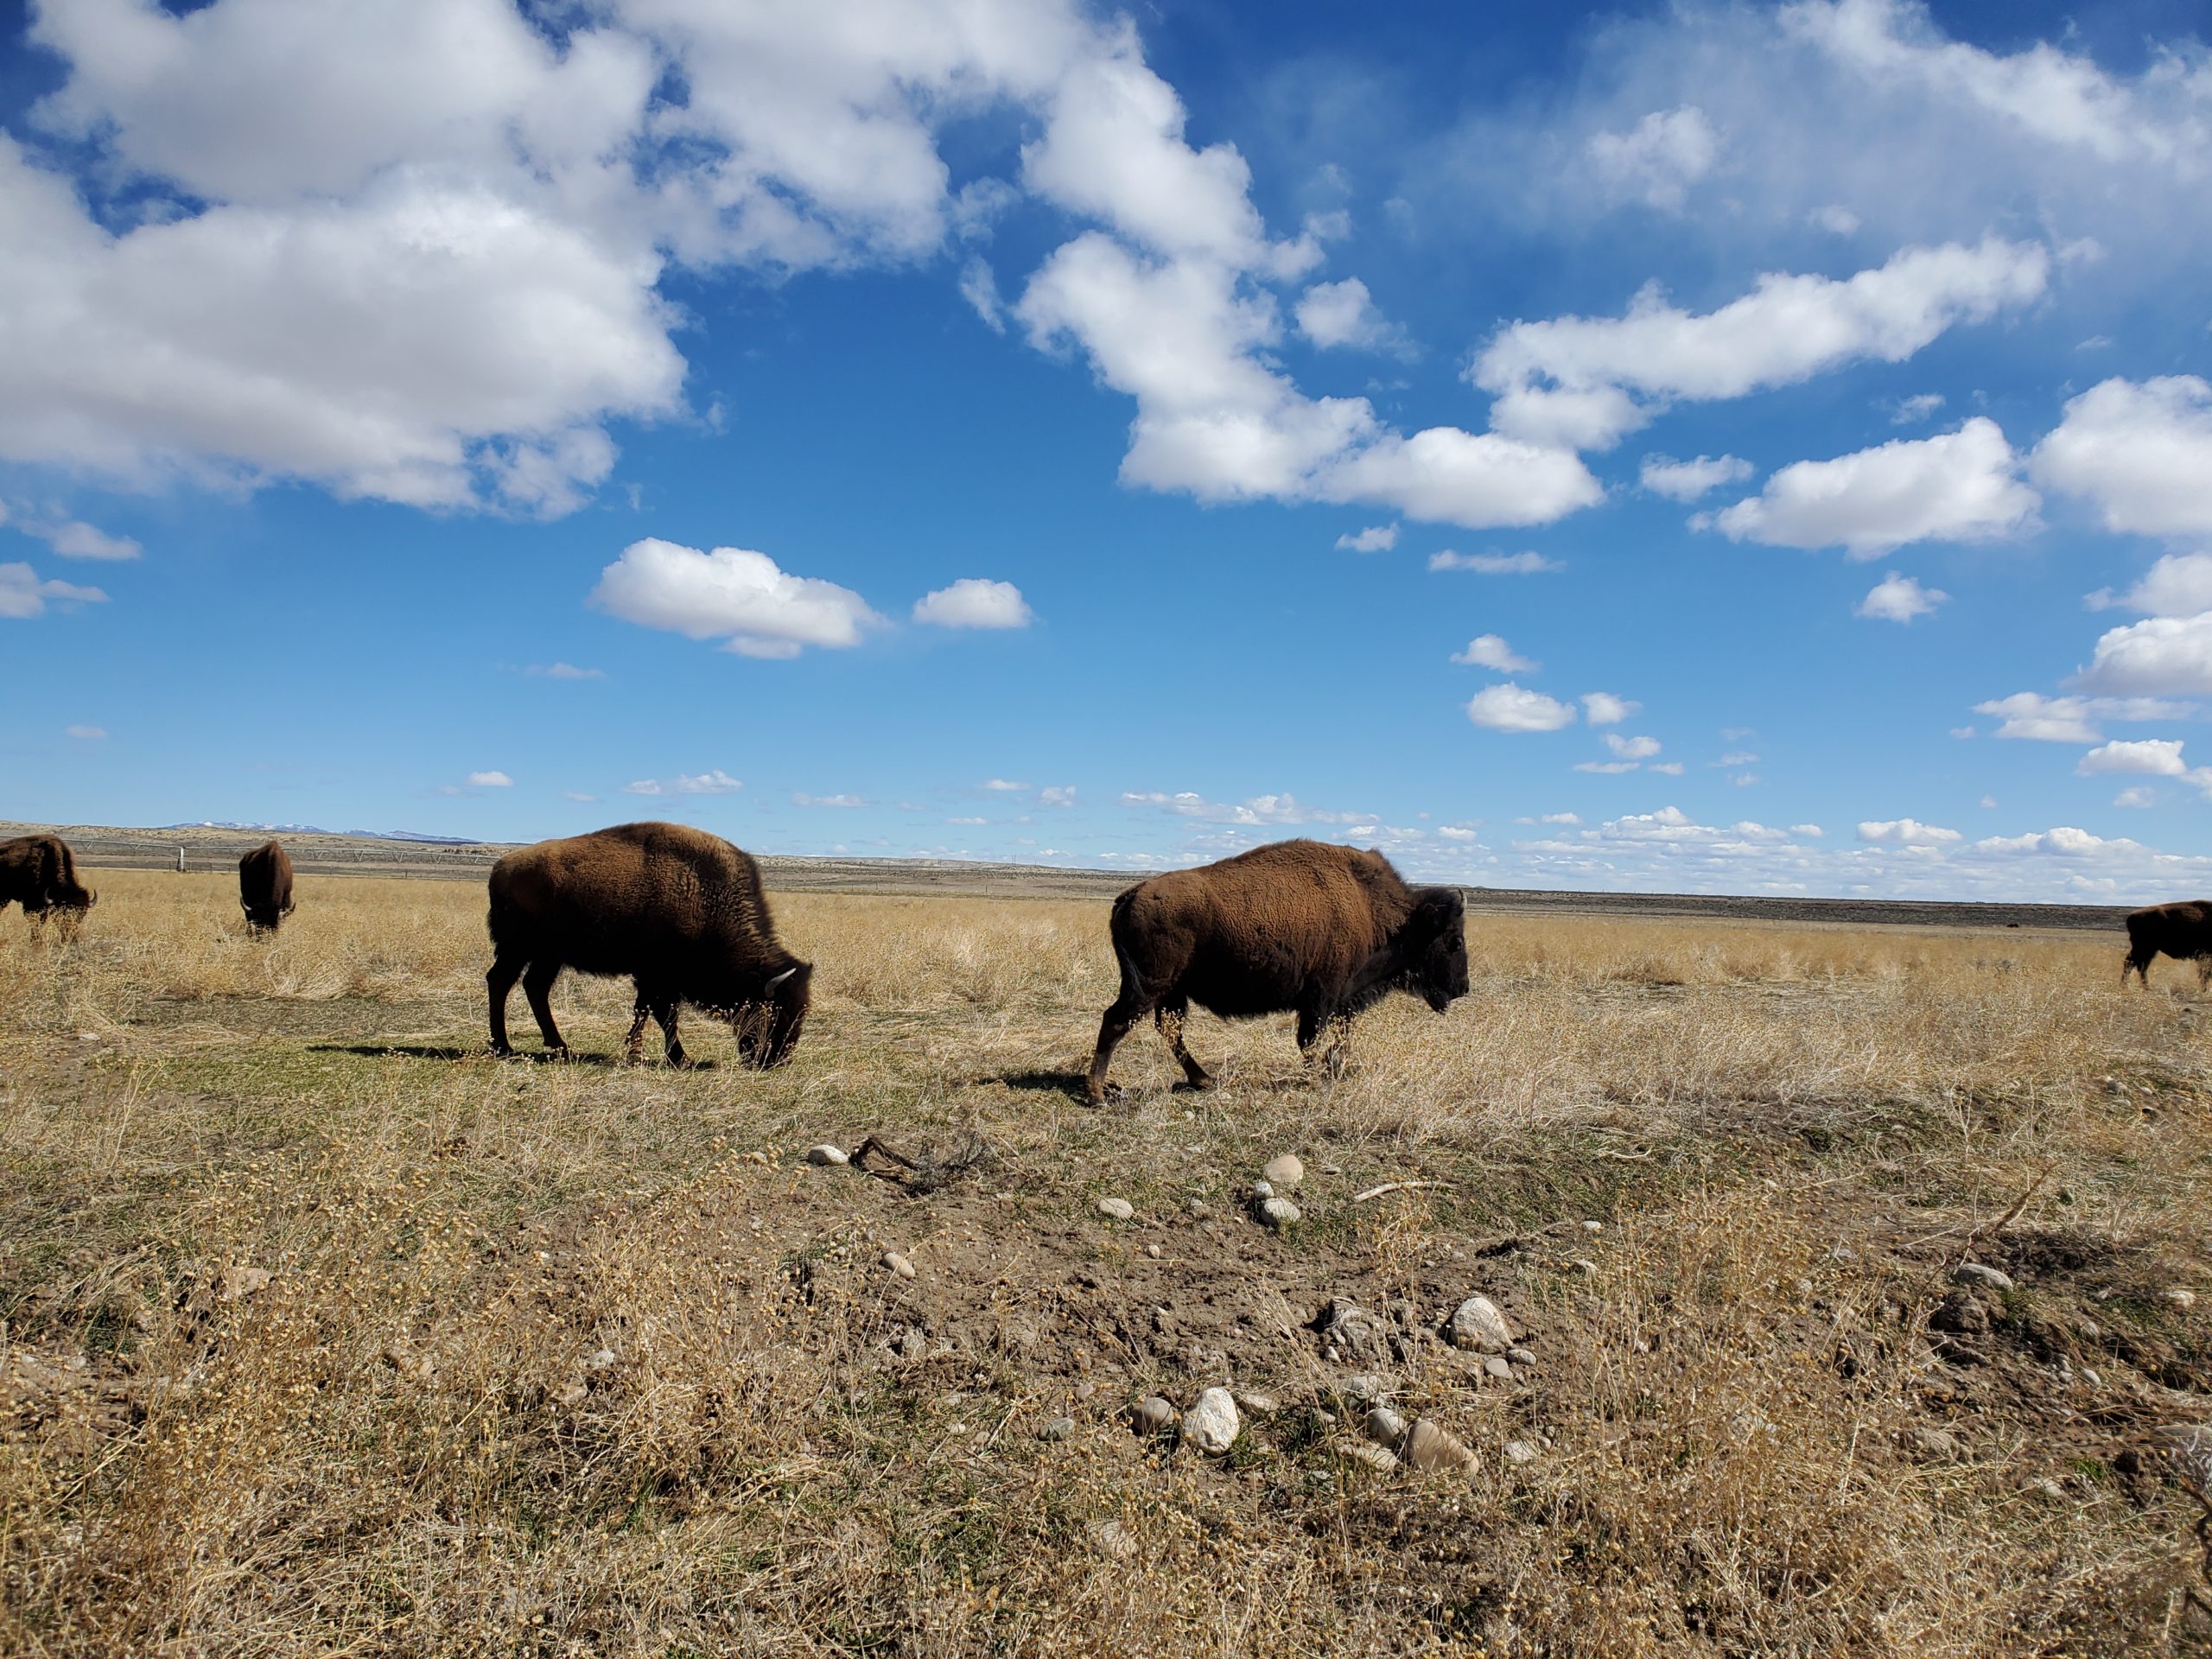 Quick and Dirty Guide to Bison as Keystone Species